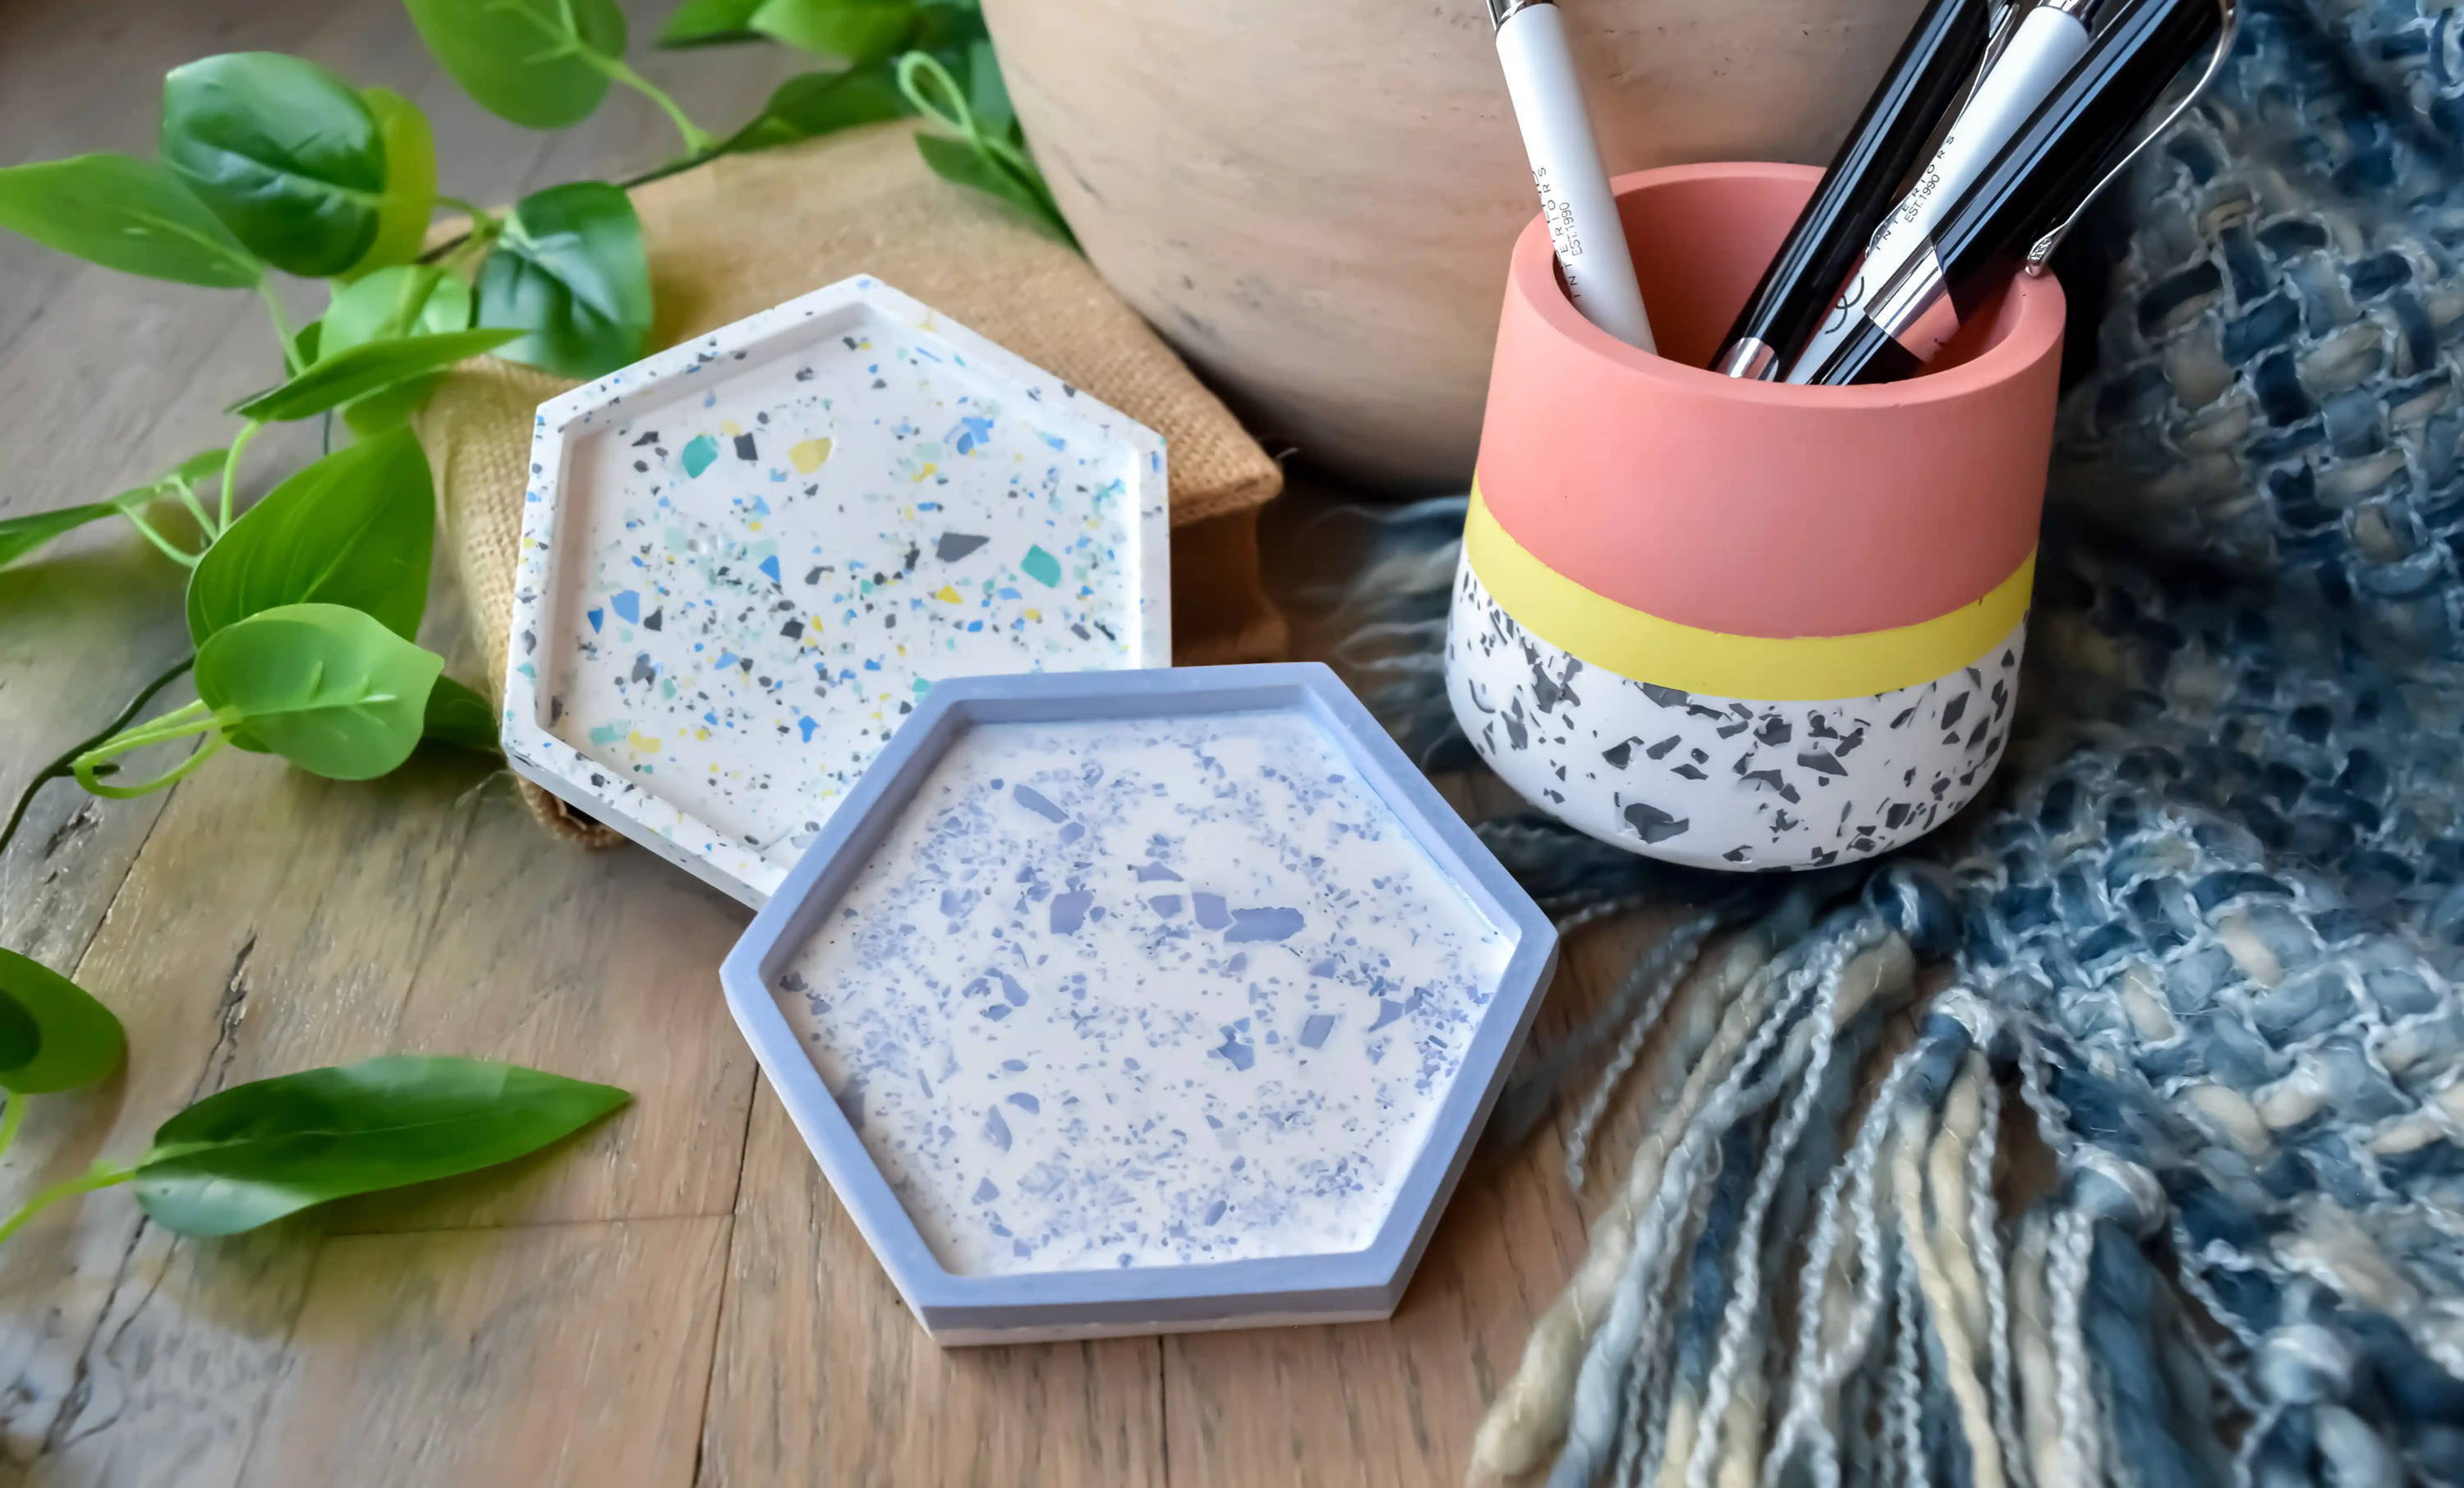 Hydrocast items made with terrazzo chips